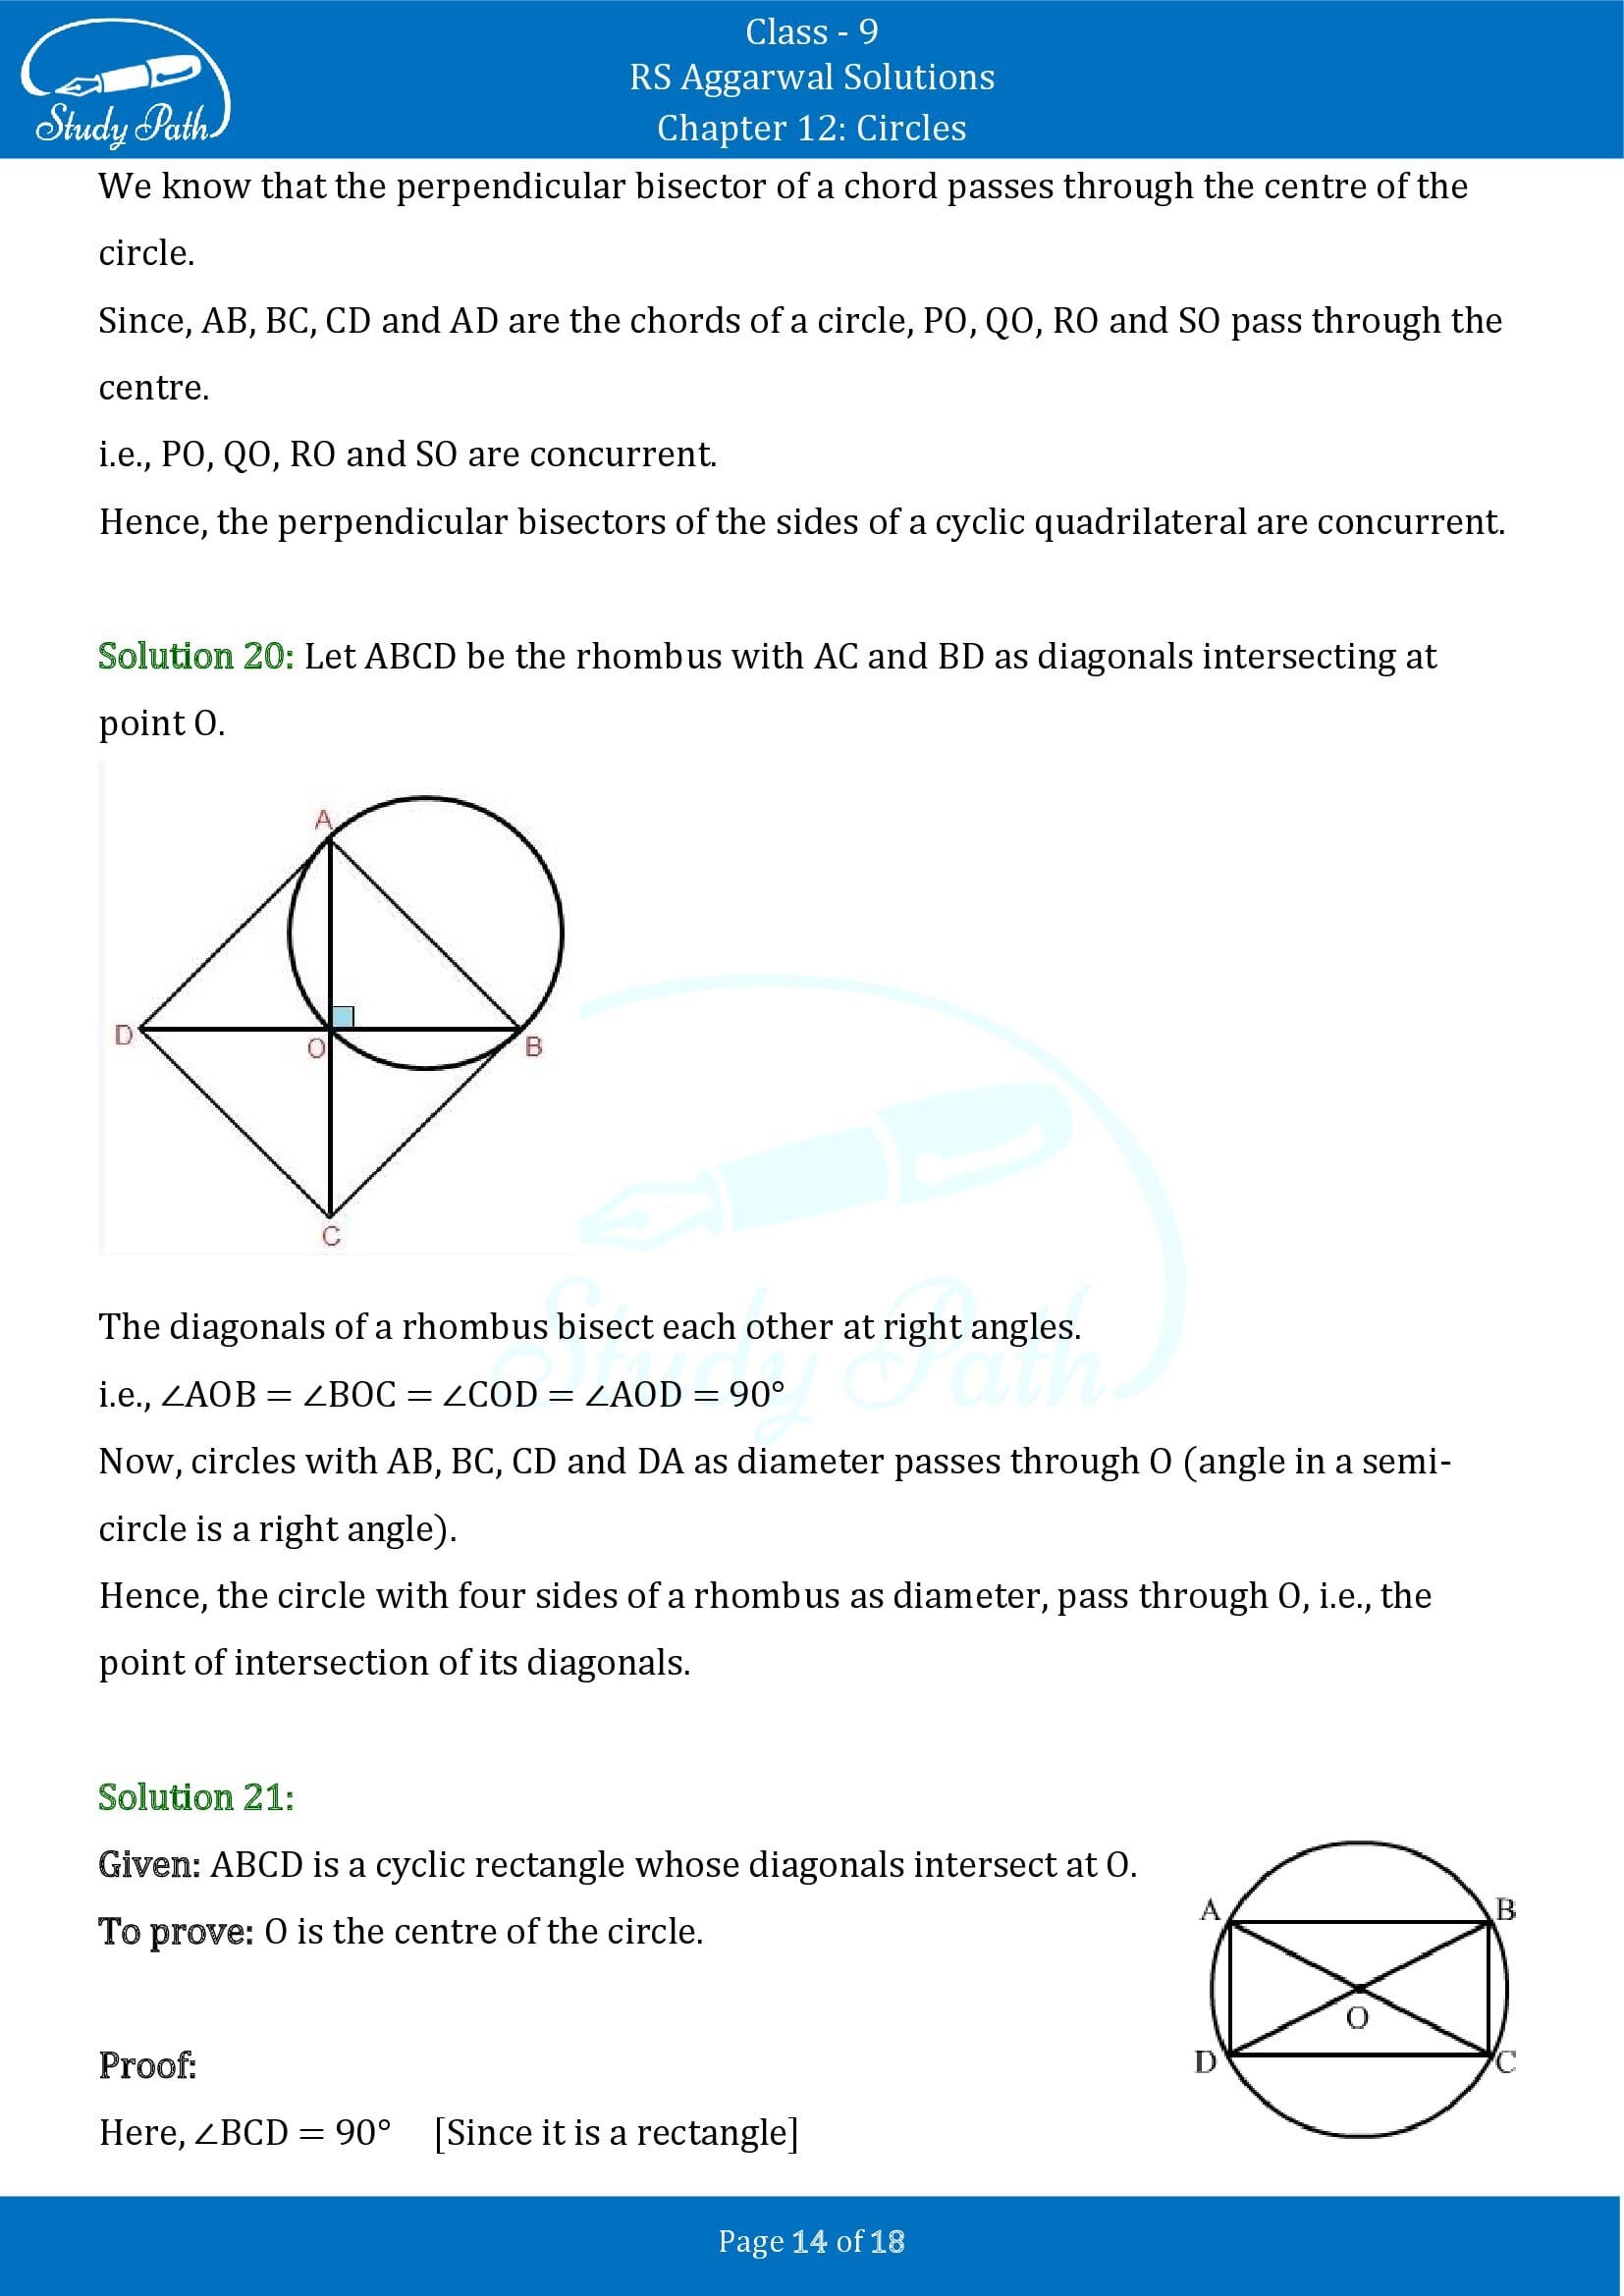 RS Aggarwal Solutions Class 9 Chapter 12 Circles Exercise 12C 00014